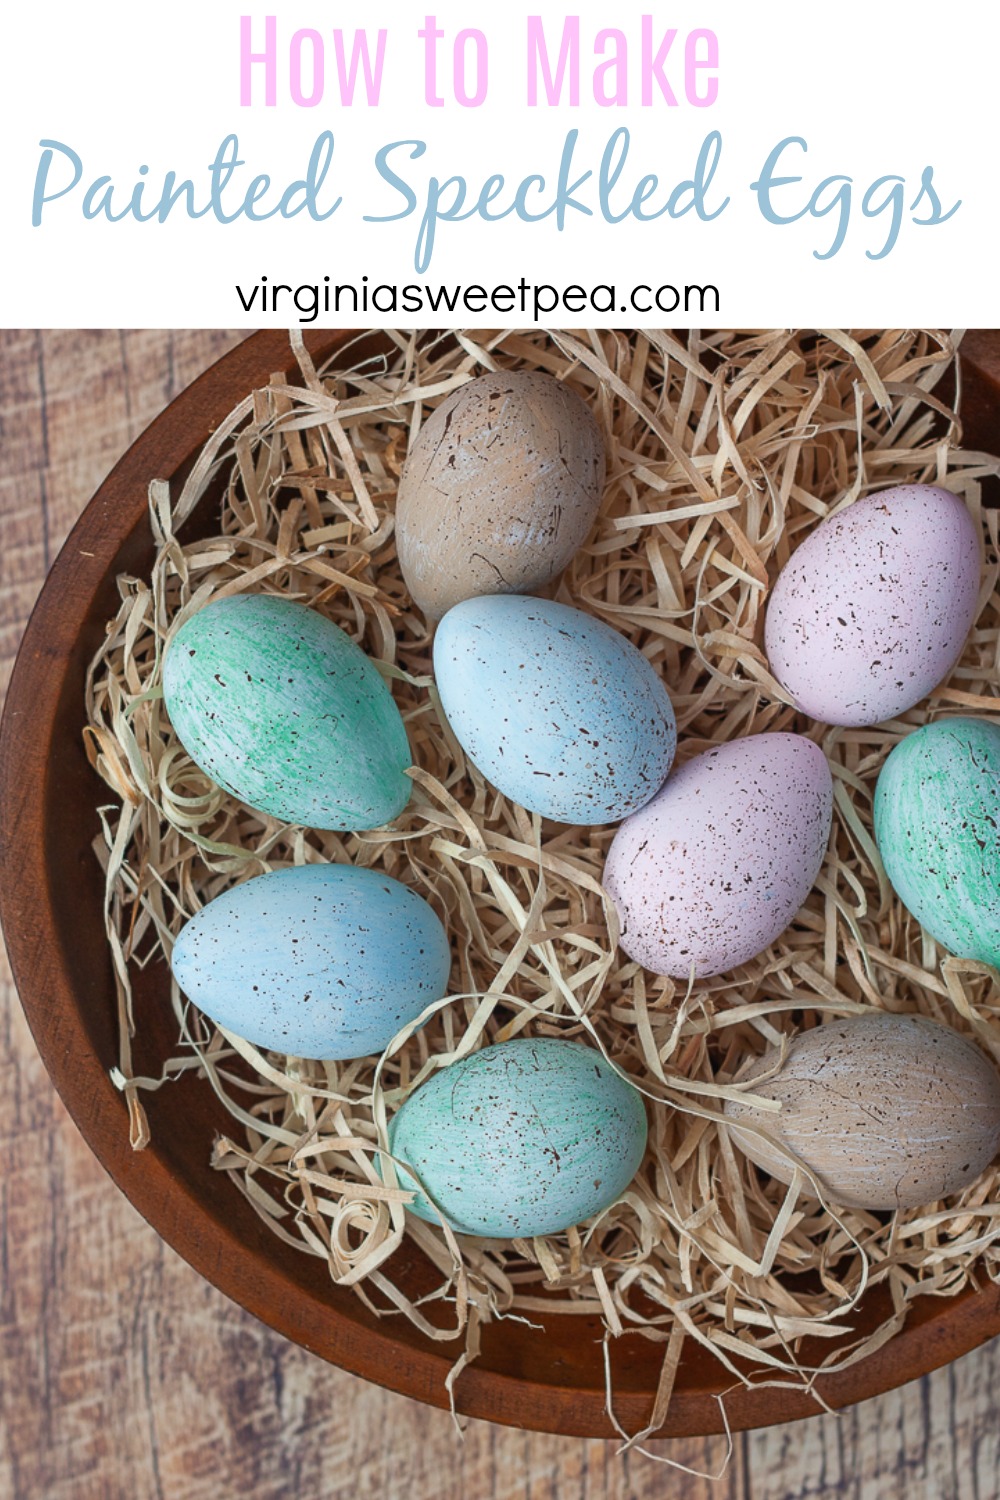 How to Make Painted Speckled Eggs Graphic